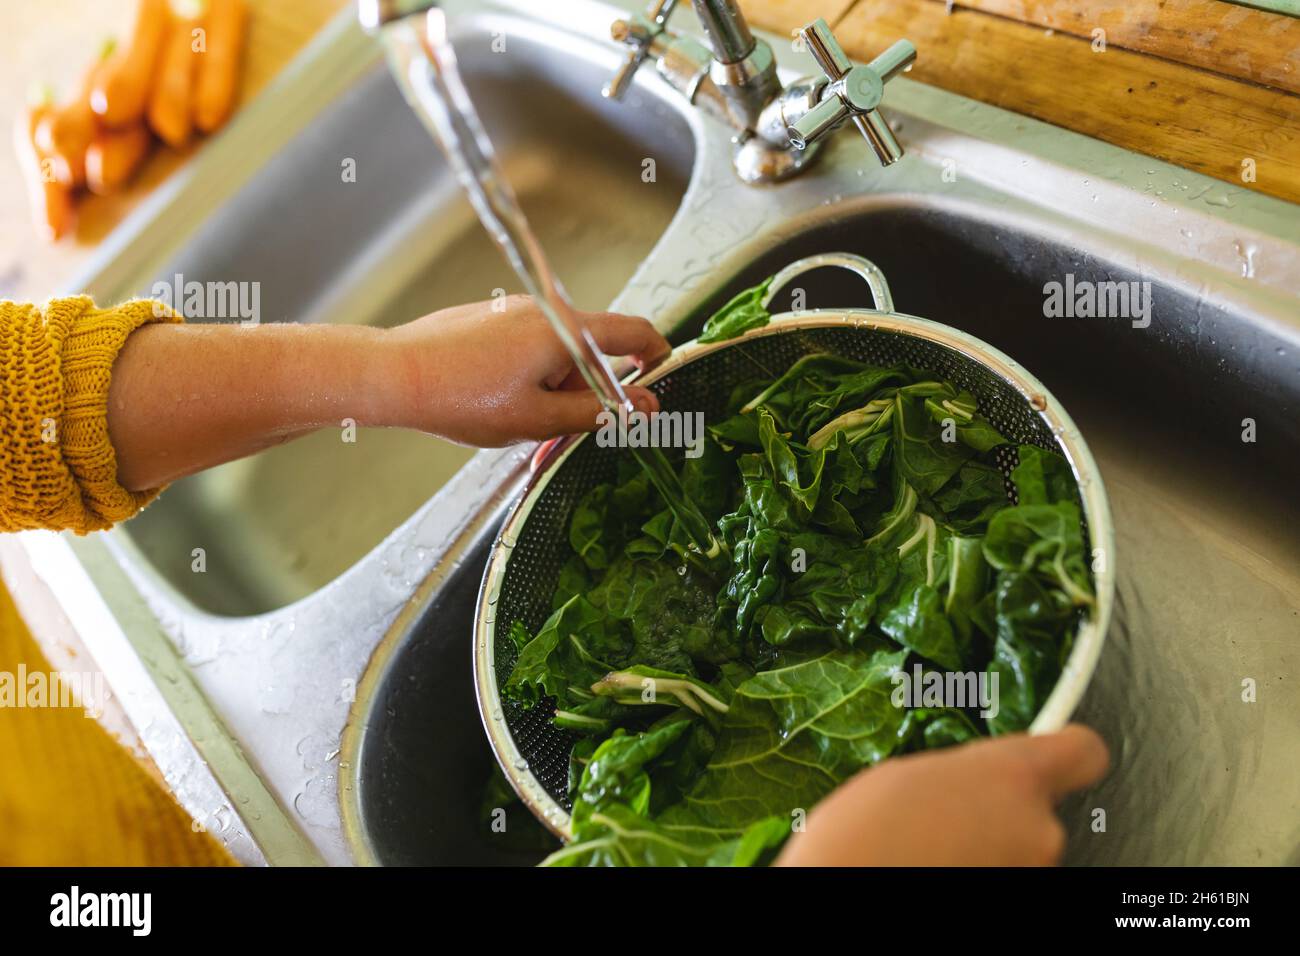 Hands of young woman washing green leafy vegetable in colander under water in kitchen sink Stock Photo